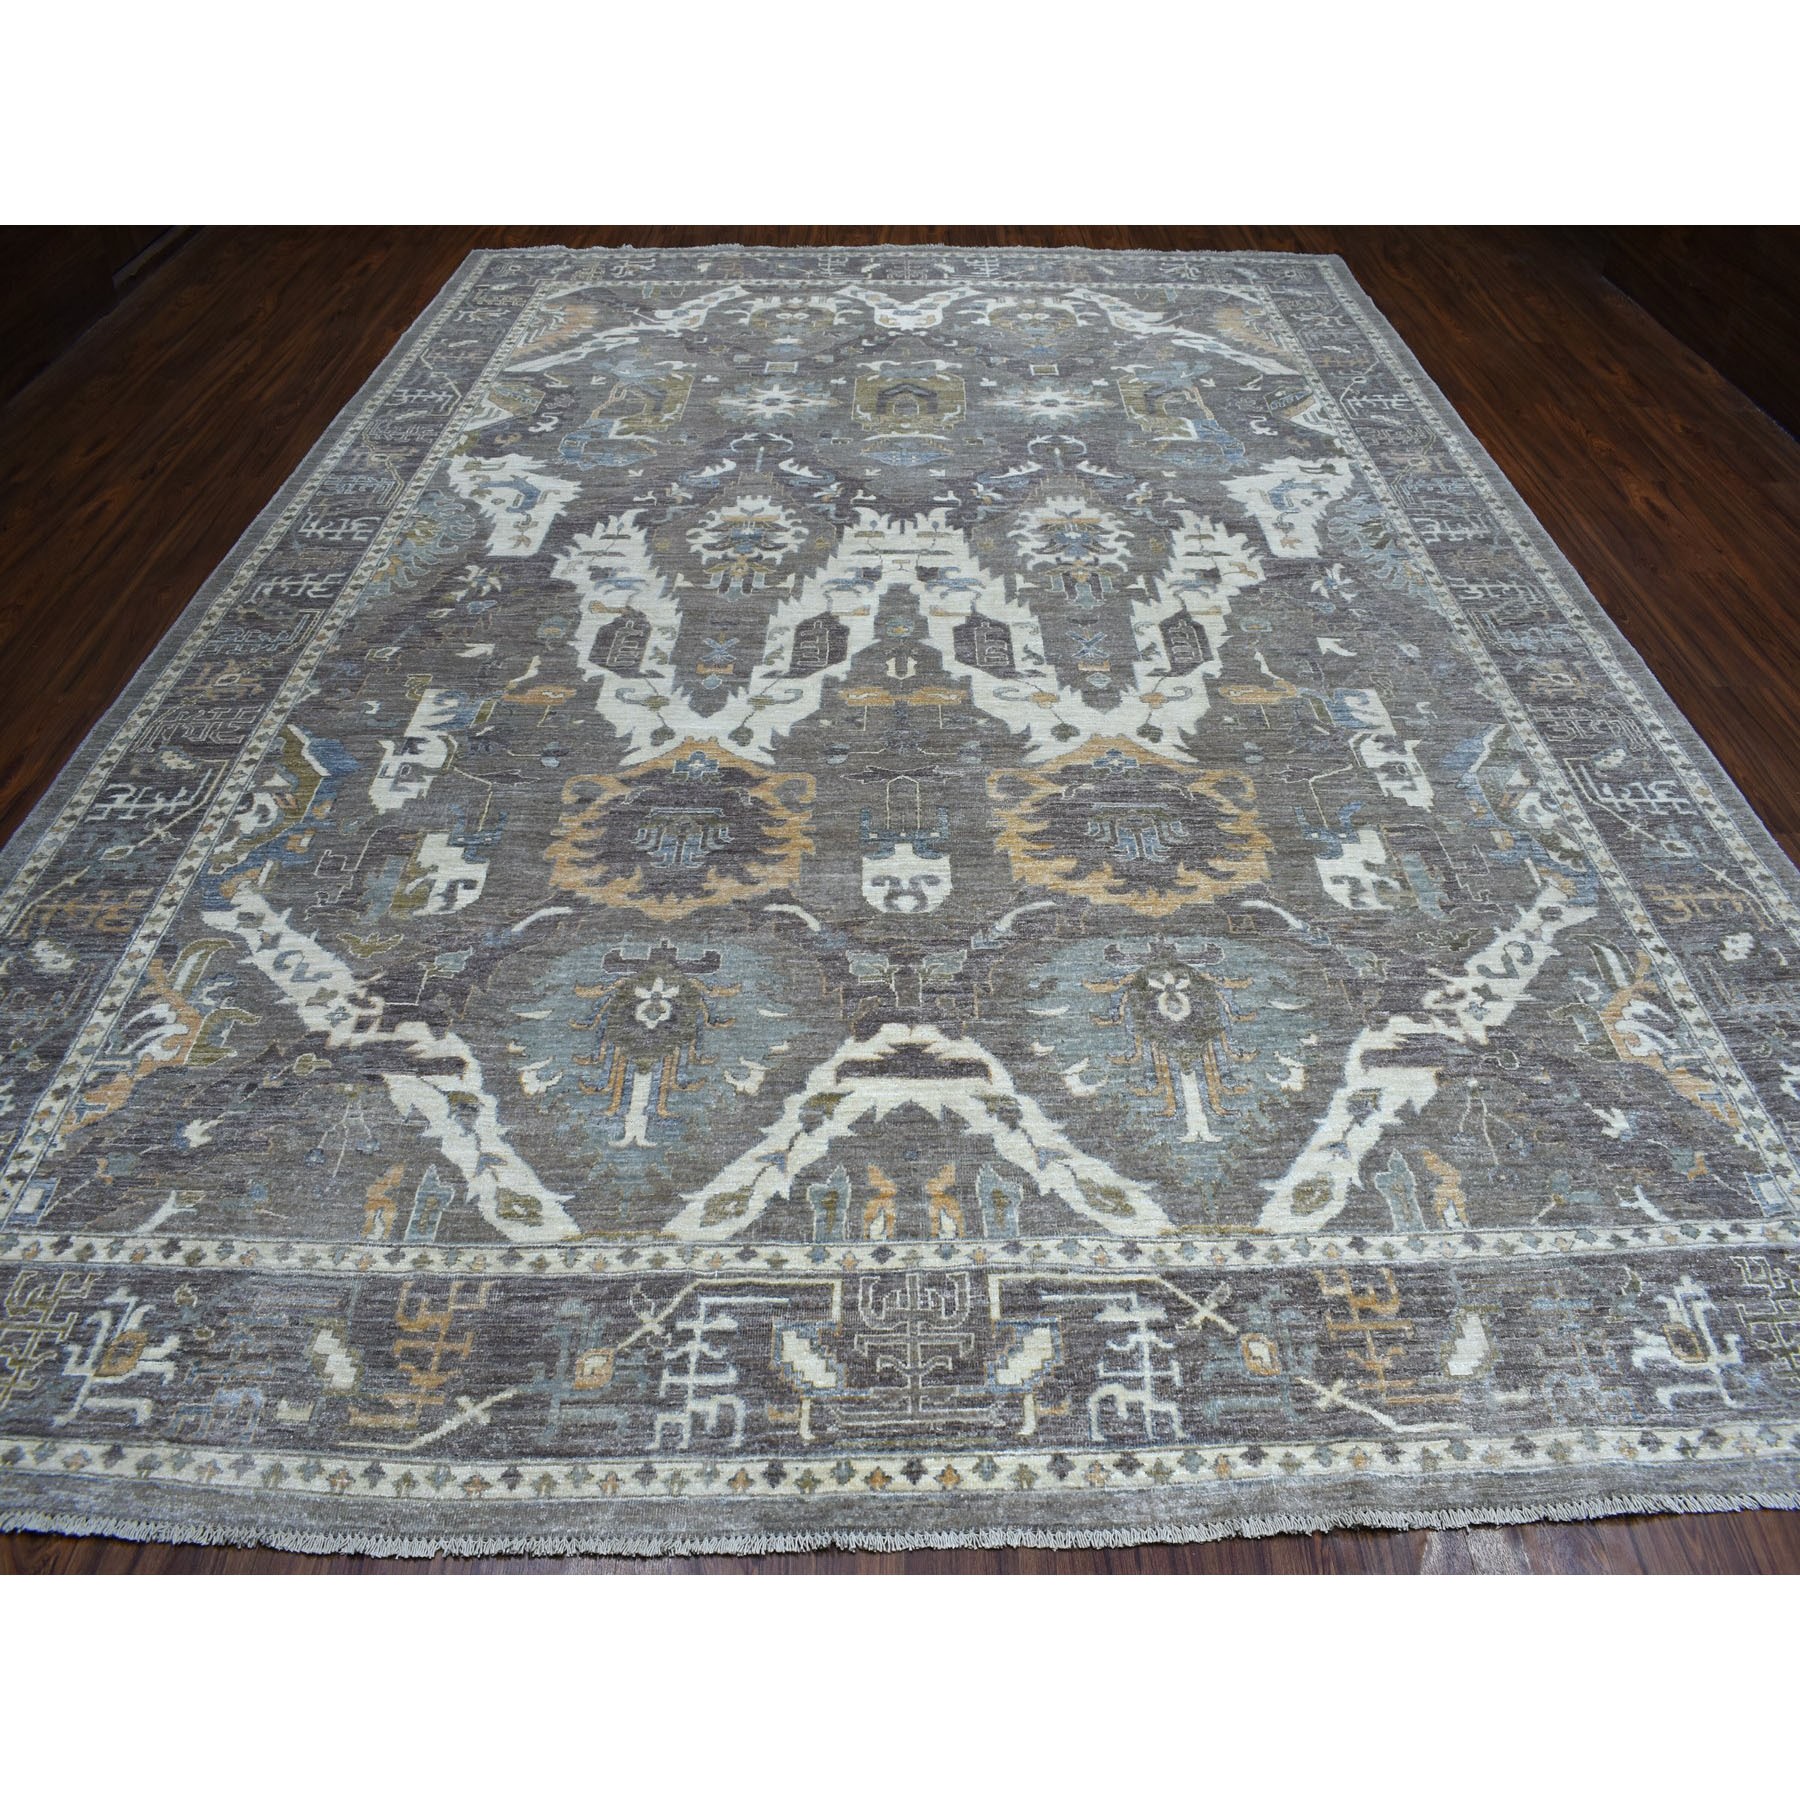 10-x13-7  Gray Peshawar Serrated Leaves Mahal Design Hand Knotted Oriental Rug 